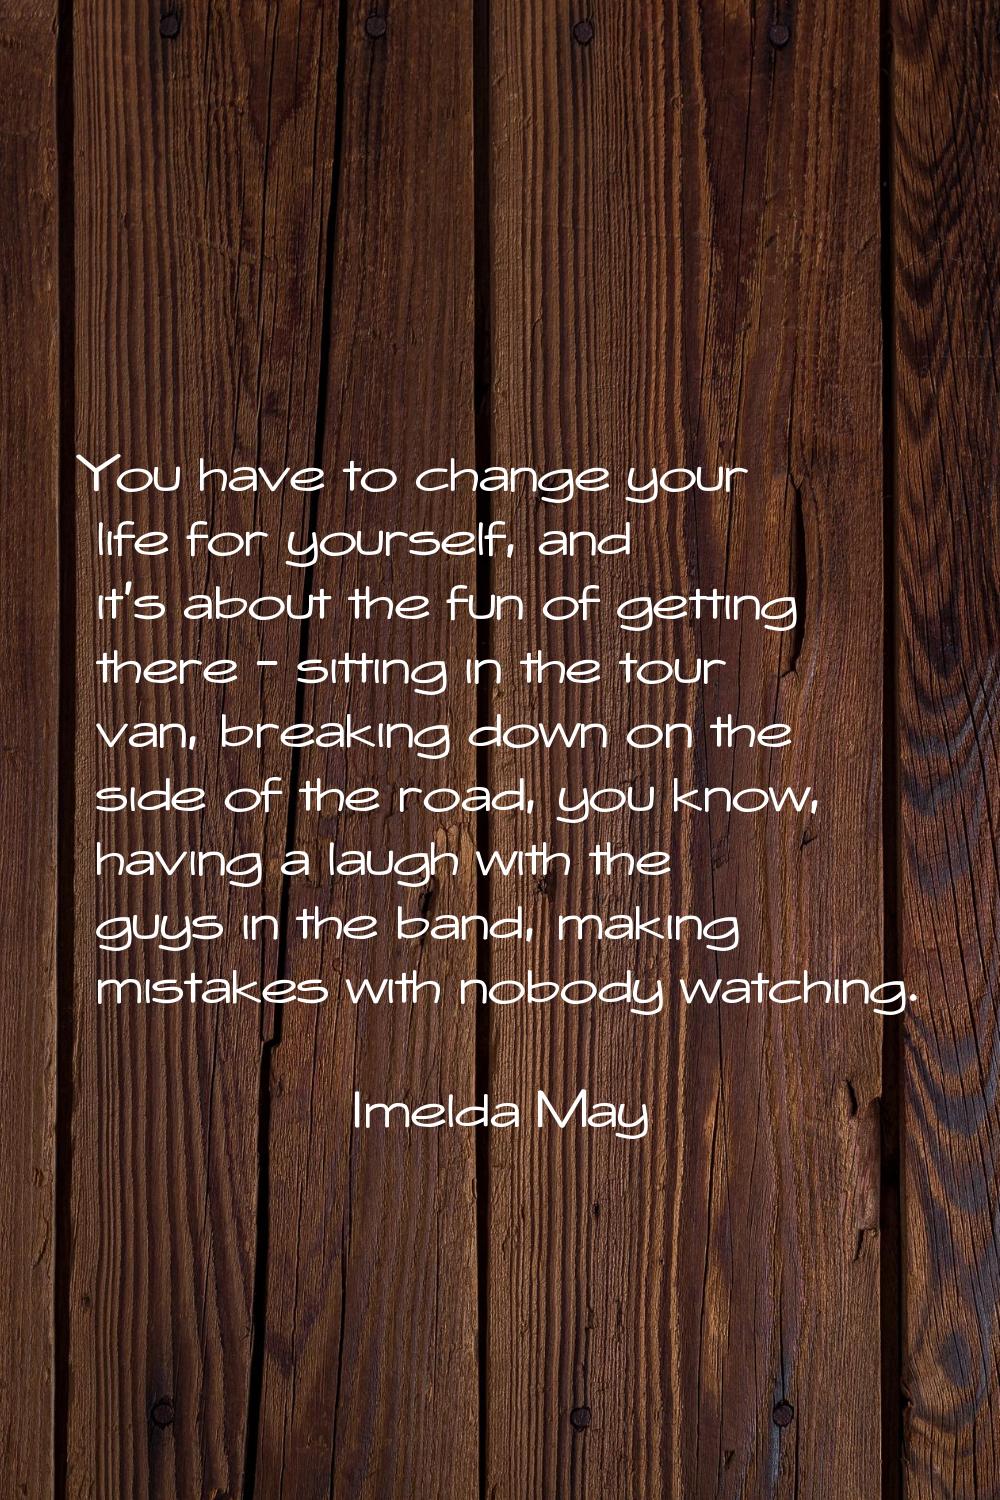 You have to change your life for yourself, and it's about the fun of getting there - sitting in the